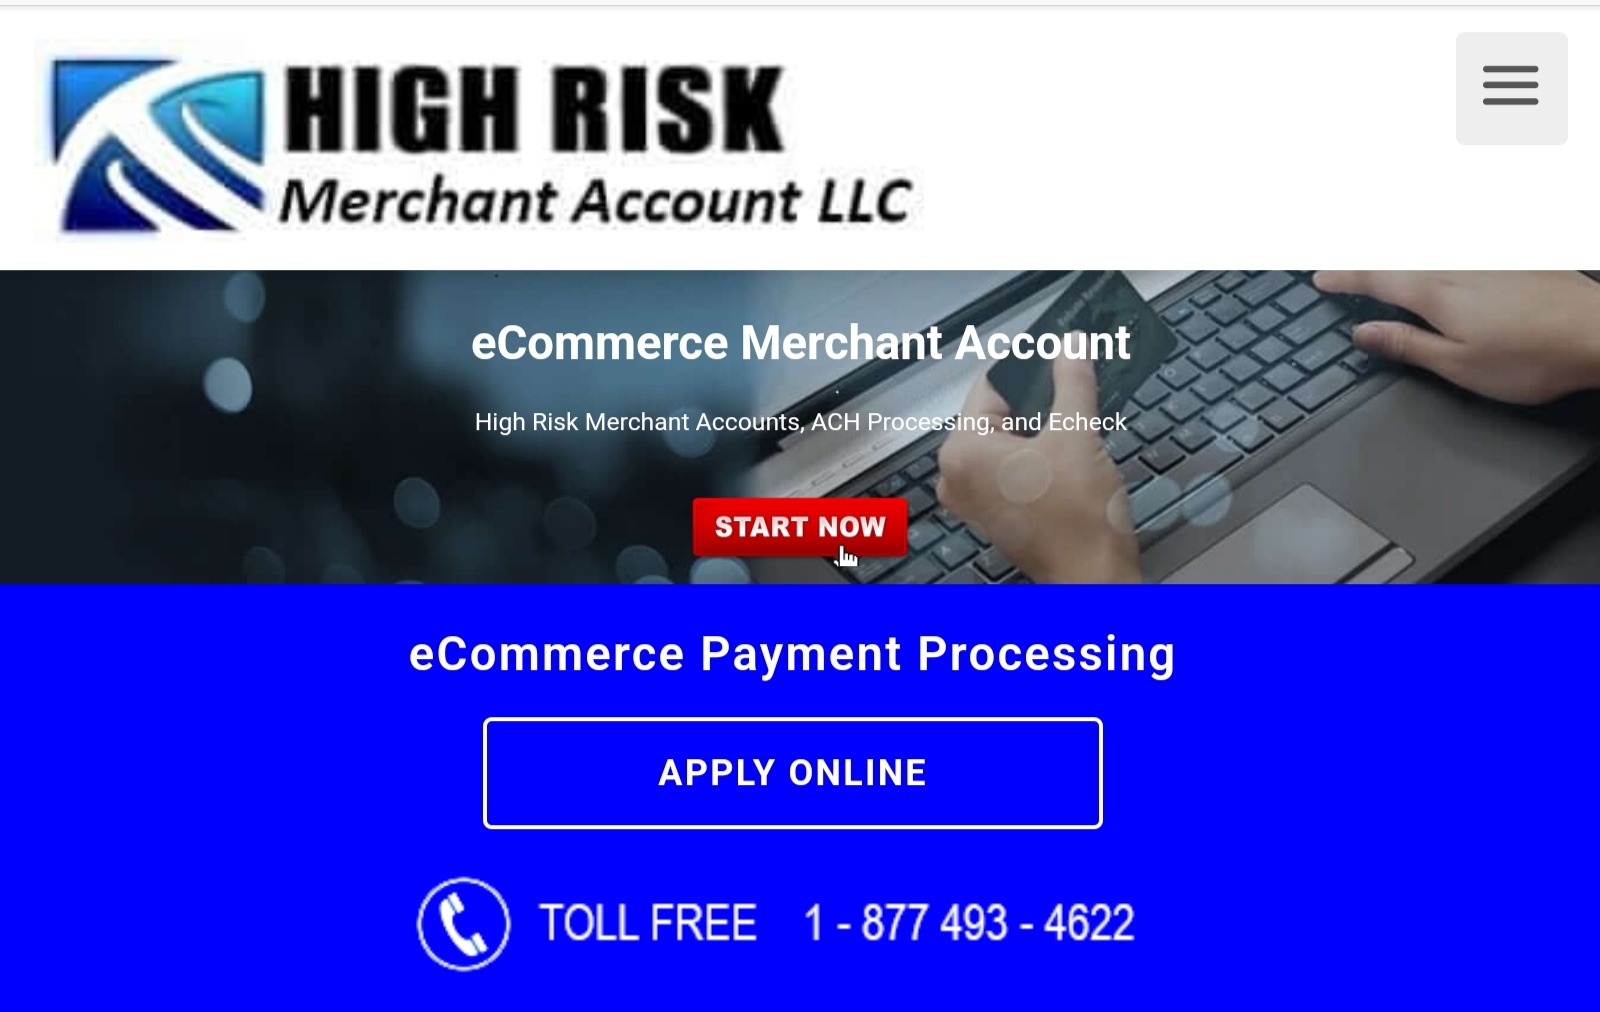 HRMA-LLC CEO Announces New eCommerce Merchant Account - Payment Processing Solution